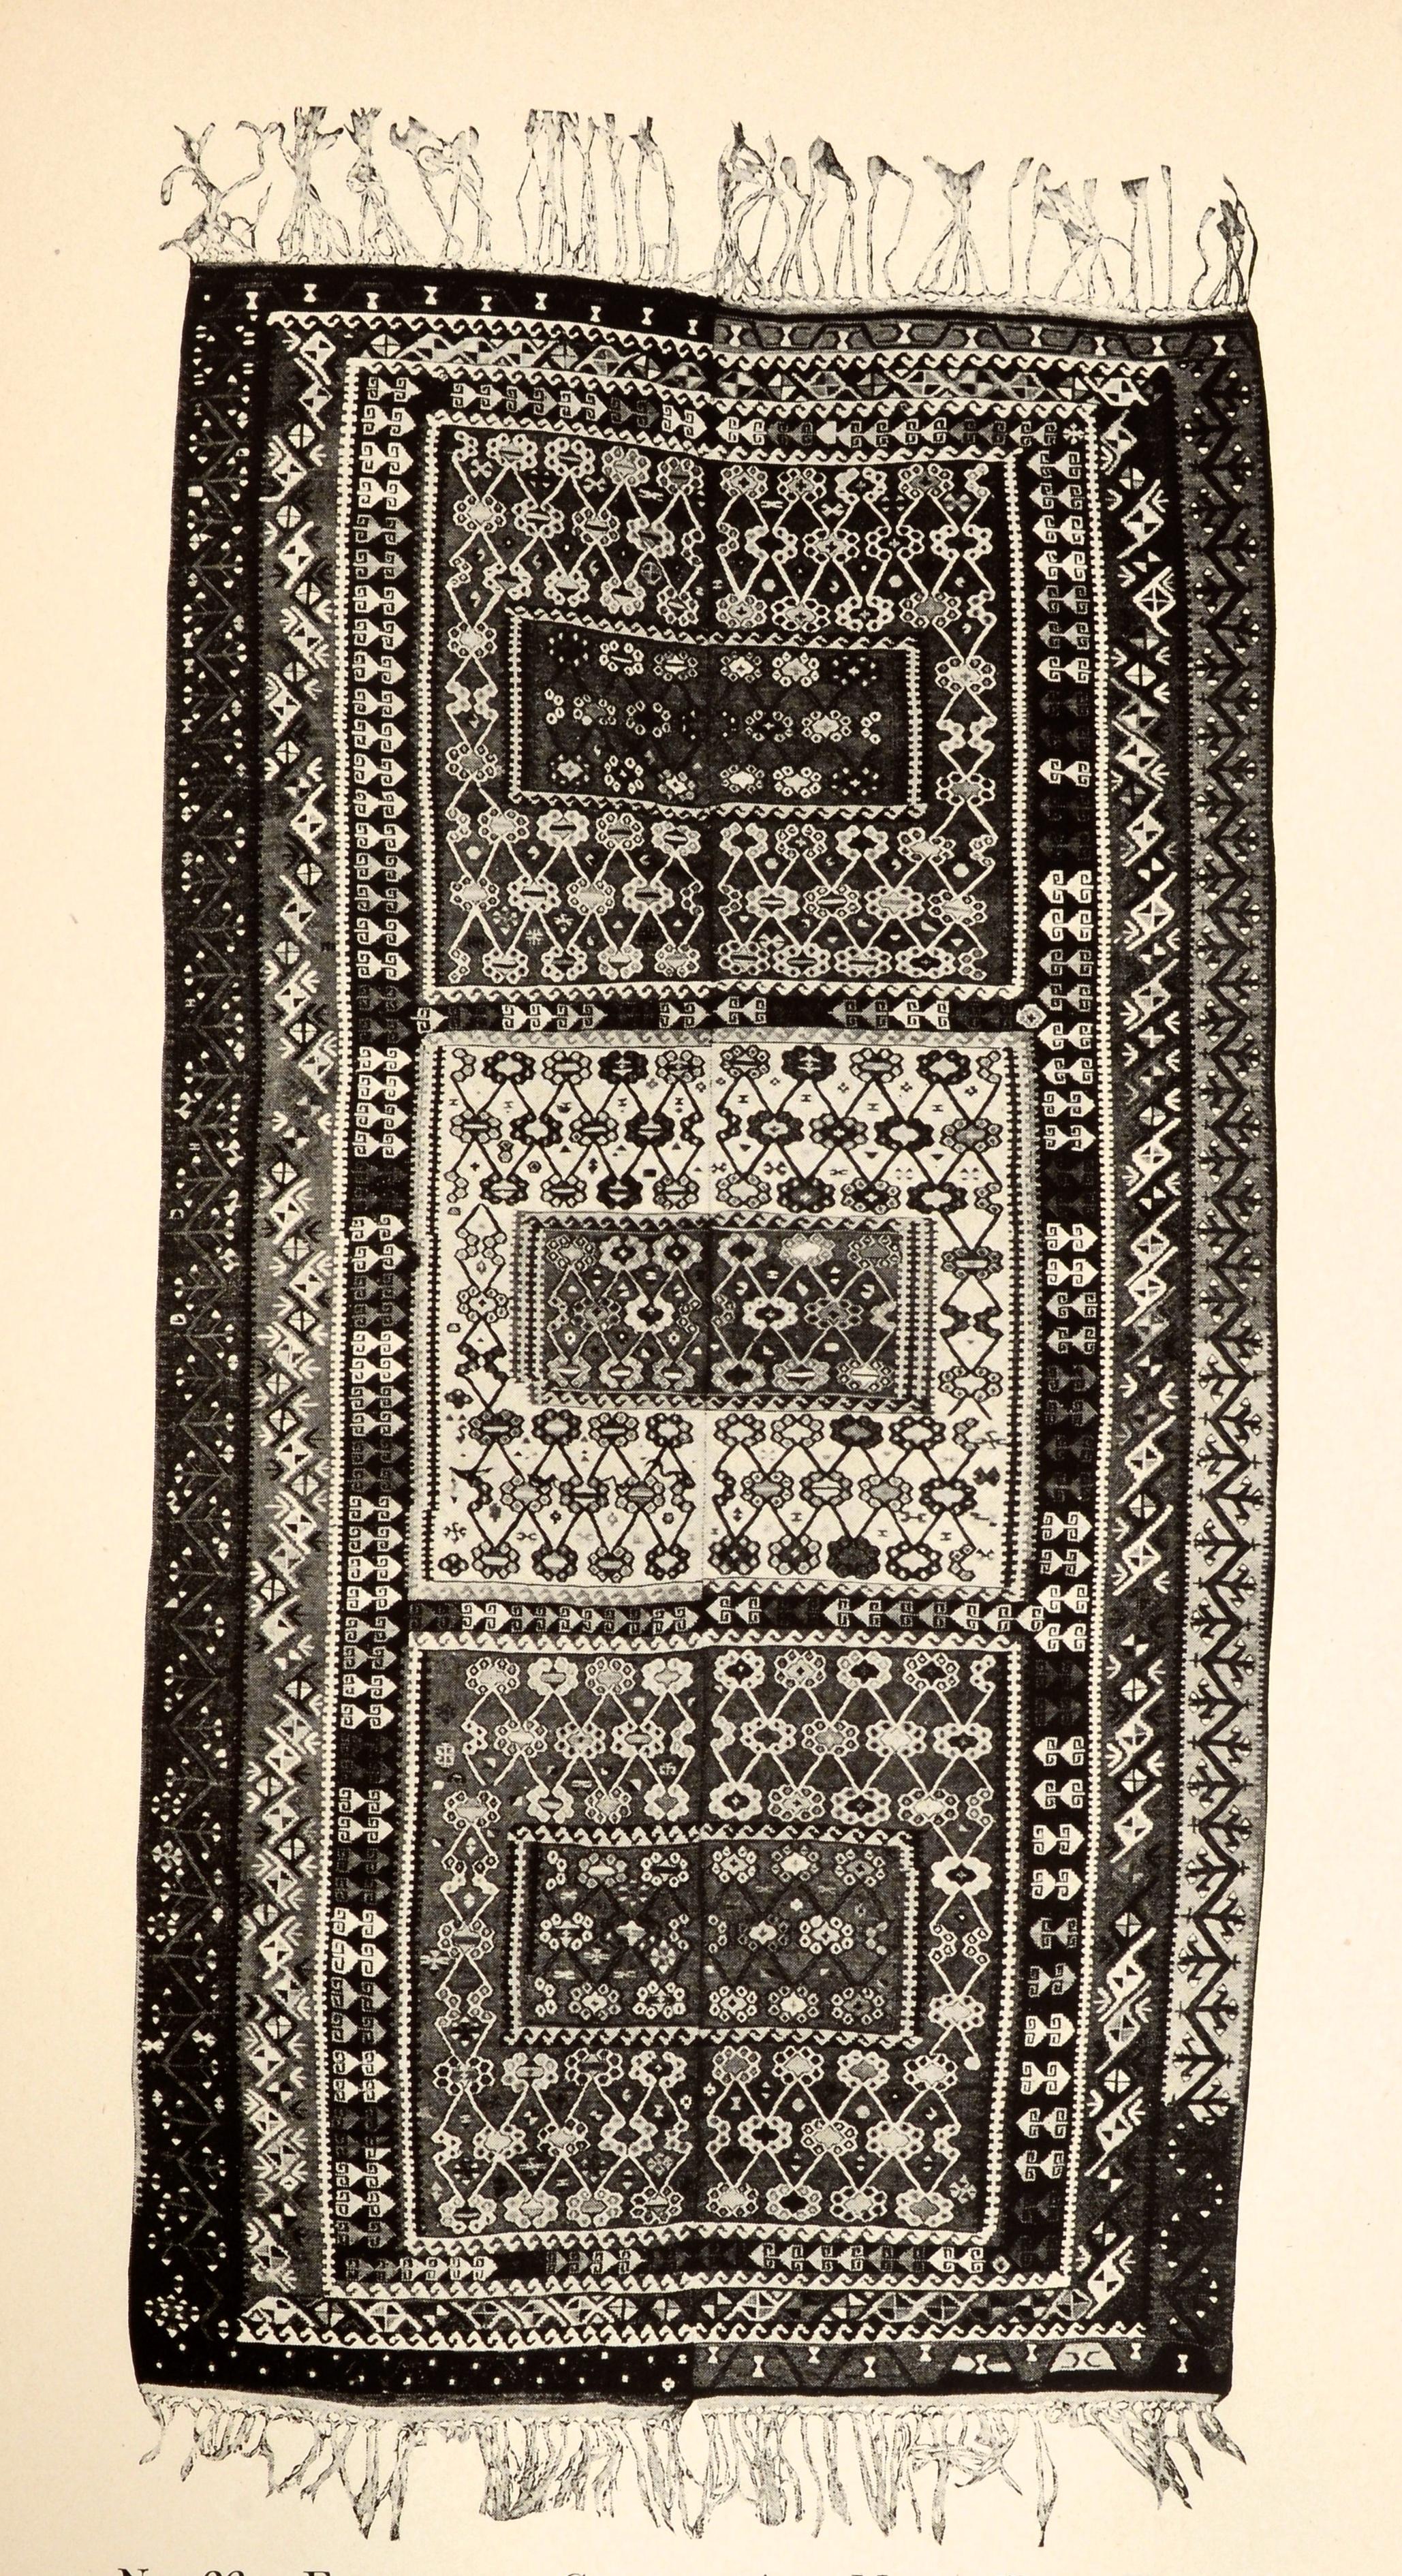 Illustrated Catalog of the Art of Ancient Looms, Antique Oriental Weaves, Persian Faiences, Jewels and Other Oriental Treasures, Auction Catalog From American Art Association New York, 1914. Very descriptive and historical catalog with great